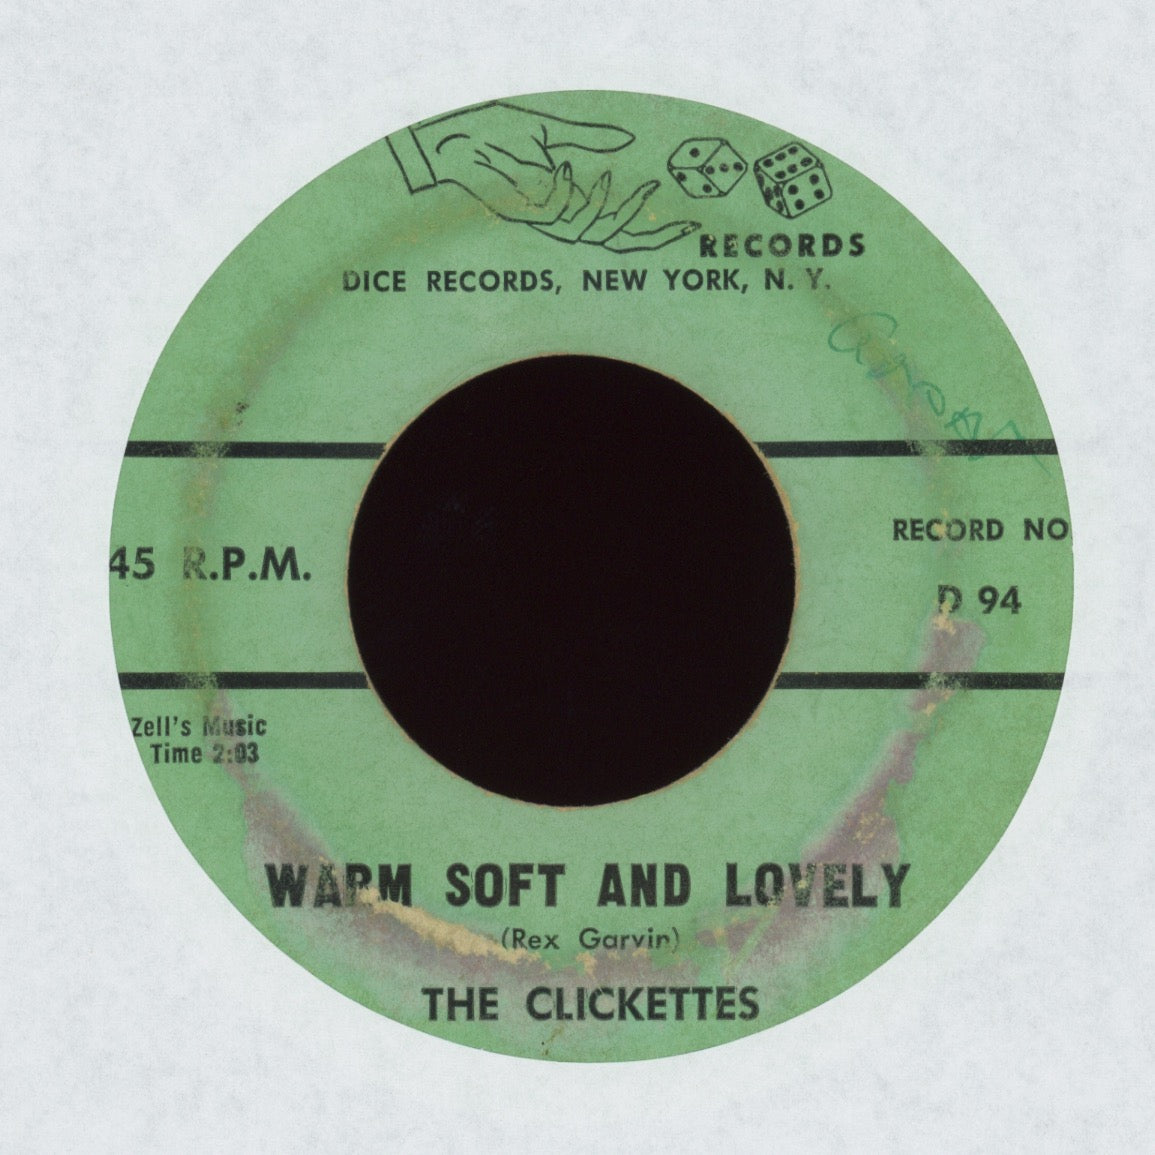 The Clickettes - Why Oh Why on Dice